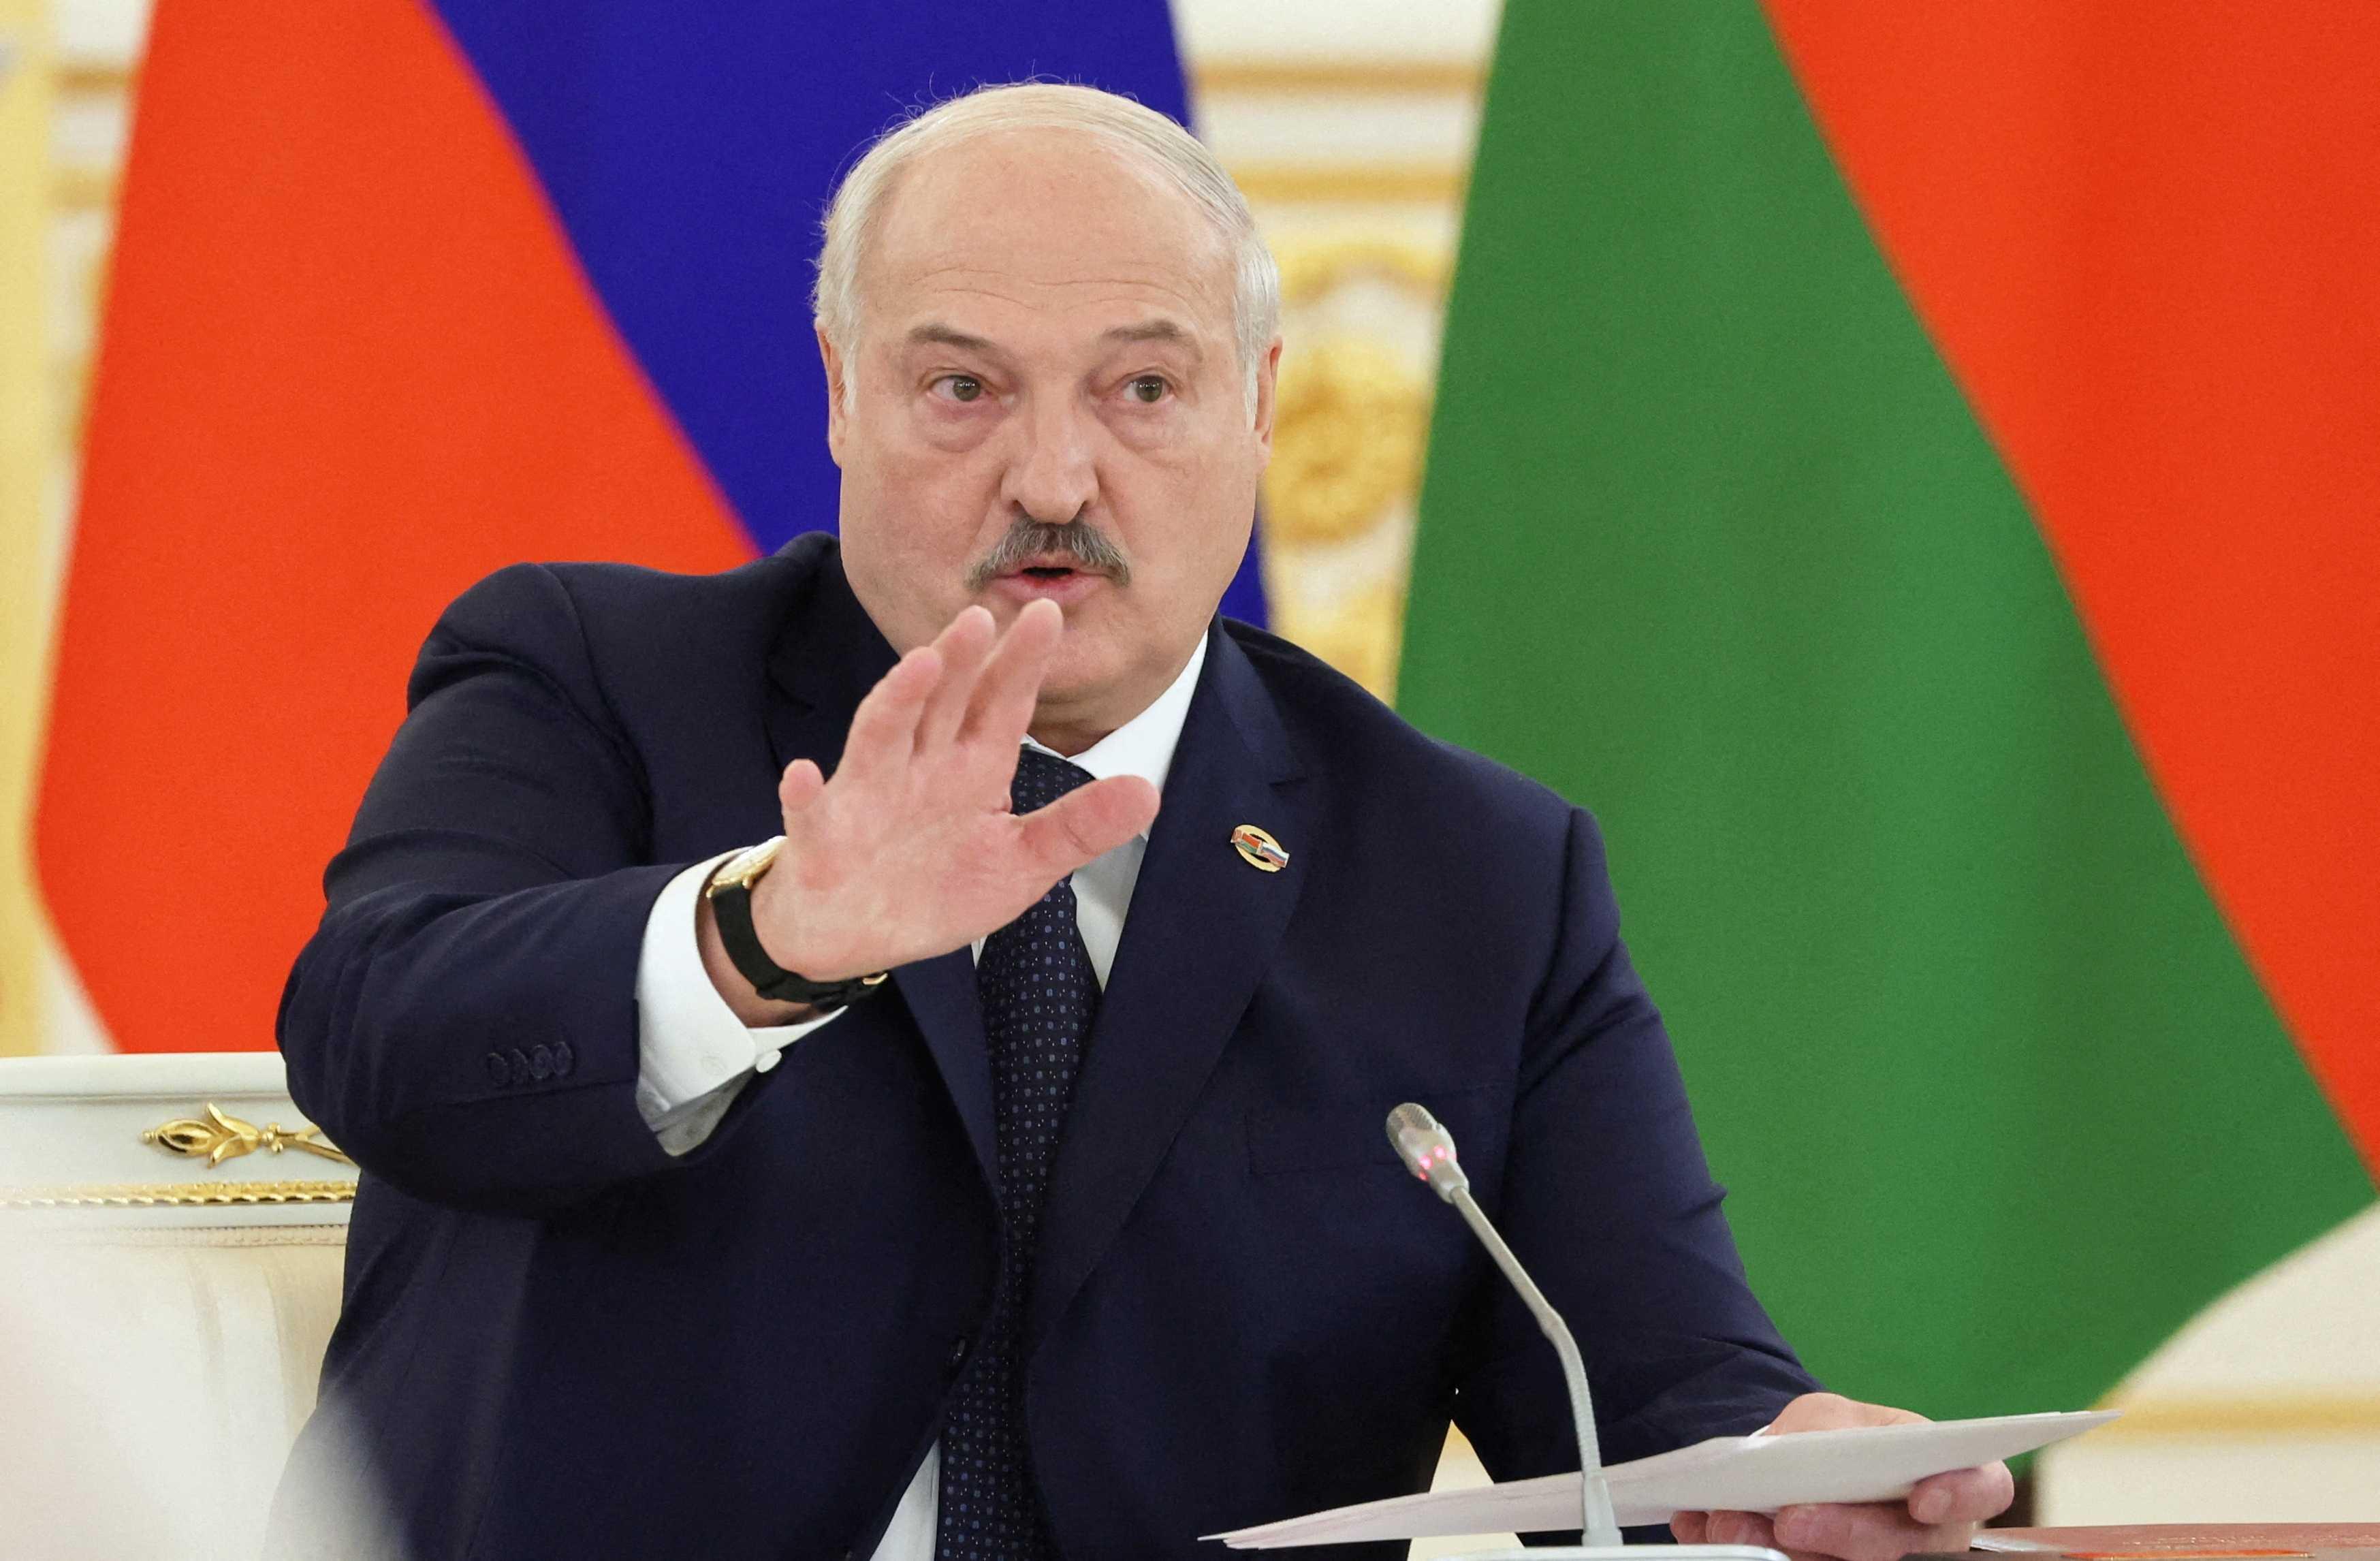 Belarusian President Alexander Lukashenko attends a meeting of the Supreme State Council of the Union State of Russia and Belarus at the Kremlin in Moscow, Russia April 6. Photo: Reuters